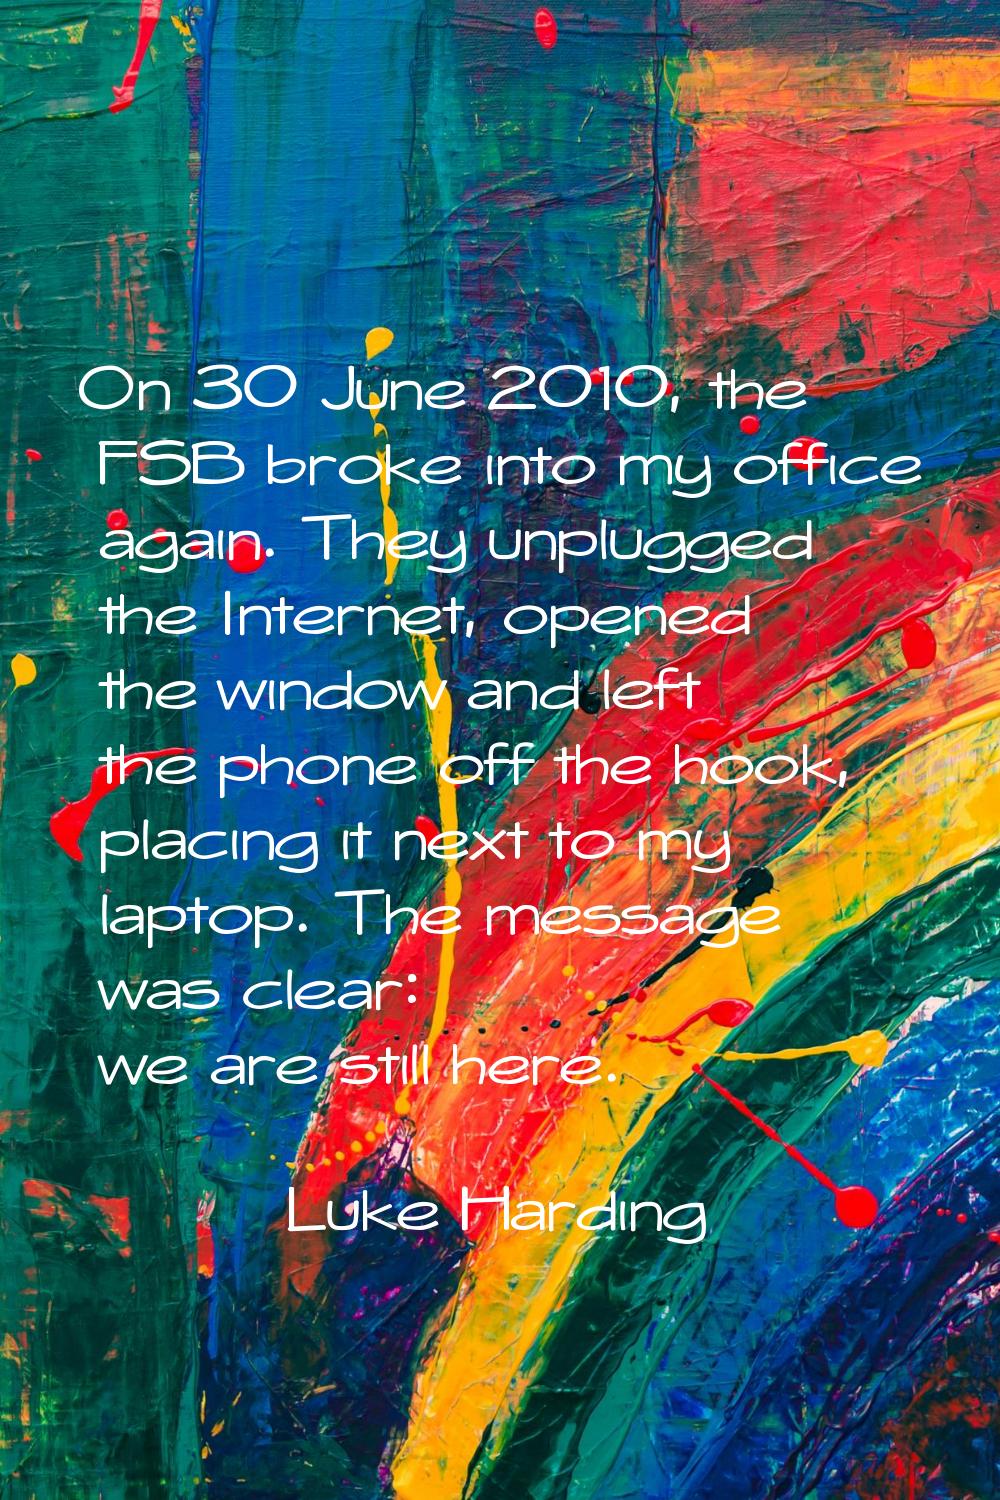 On 30 June 2010, the FSB broke into my office again. They unplugged the Internet, opened the window